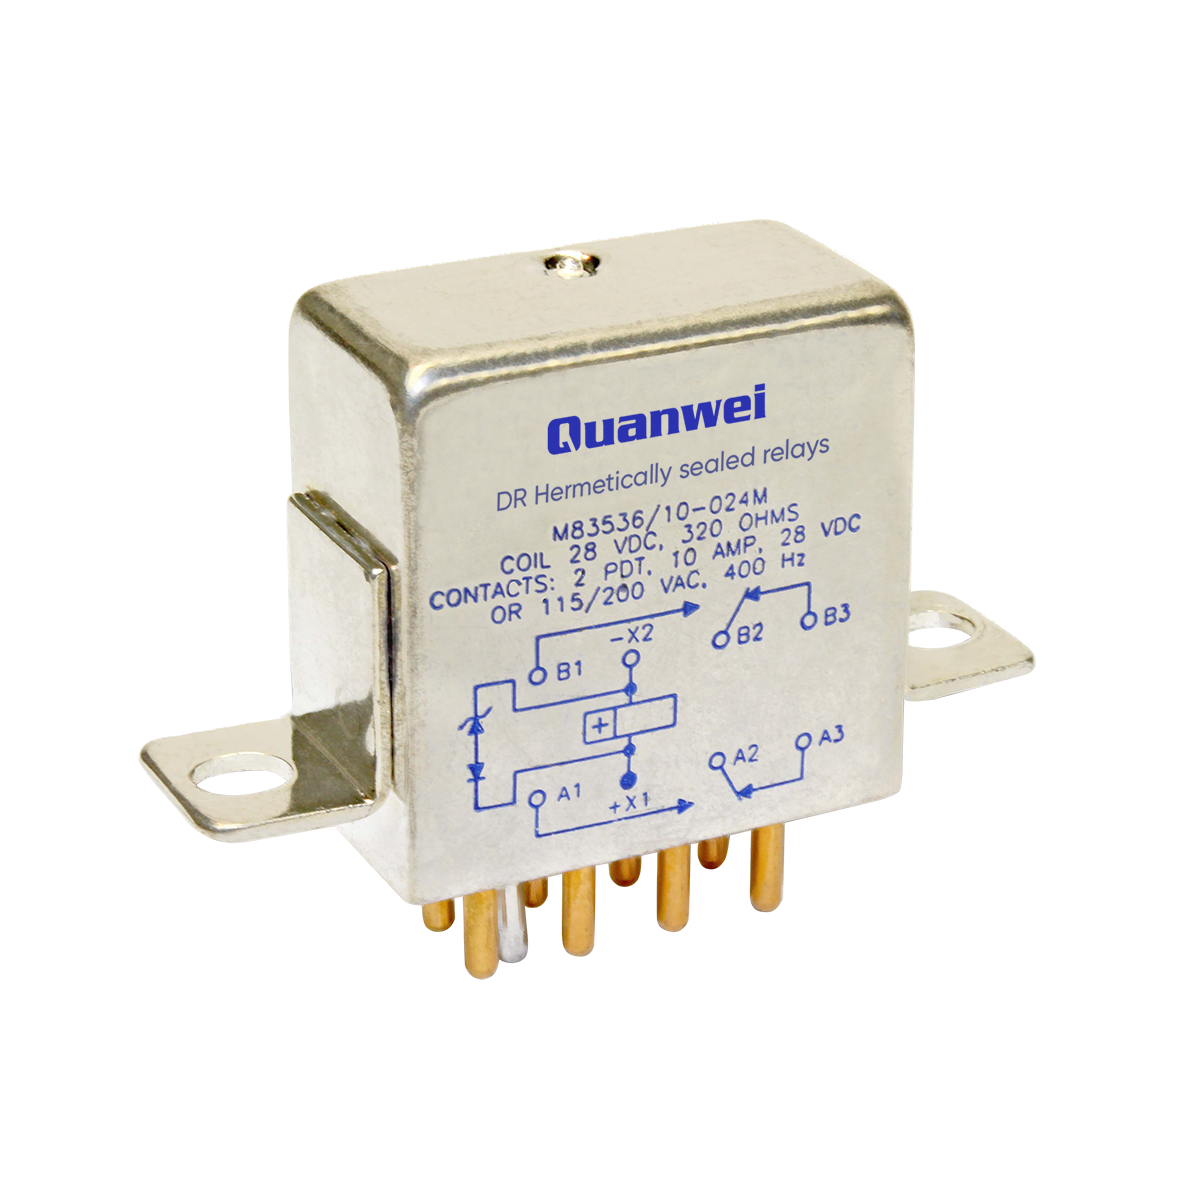 Quanwei - Hermetically sealed relays